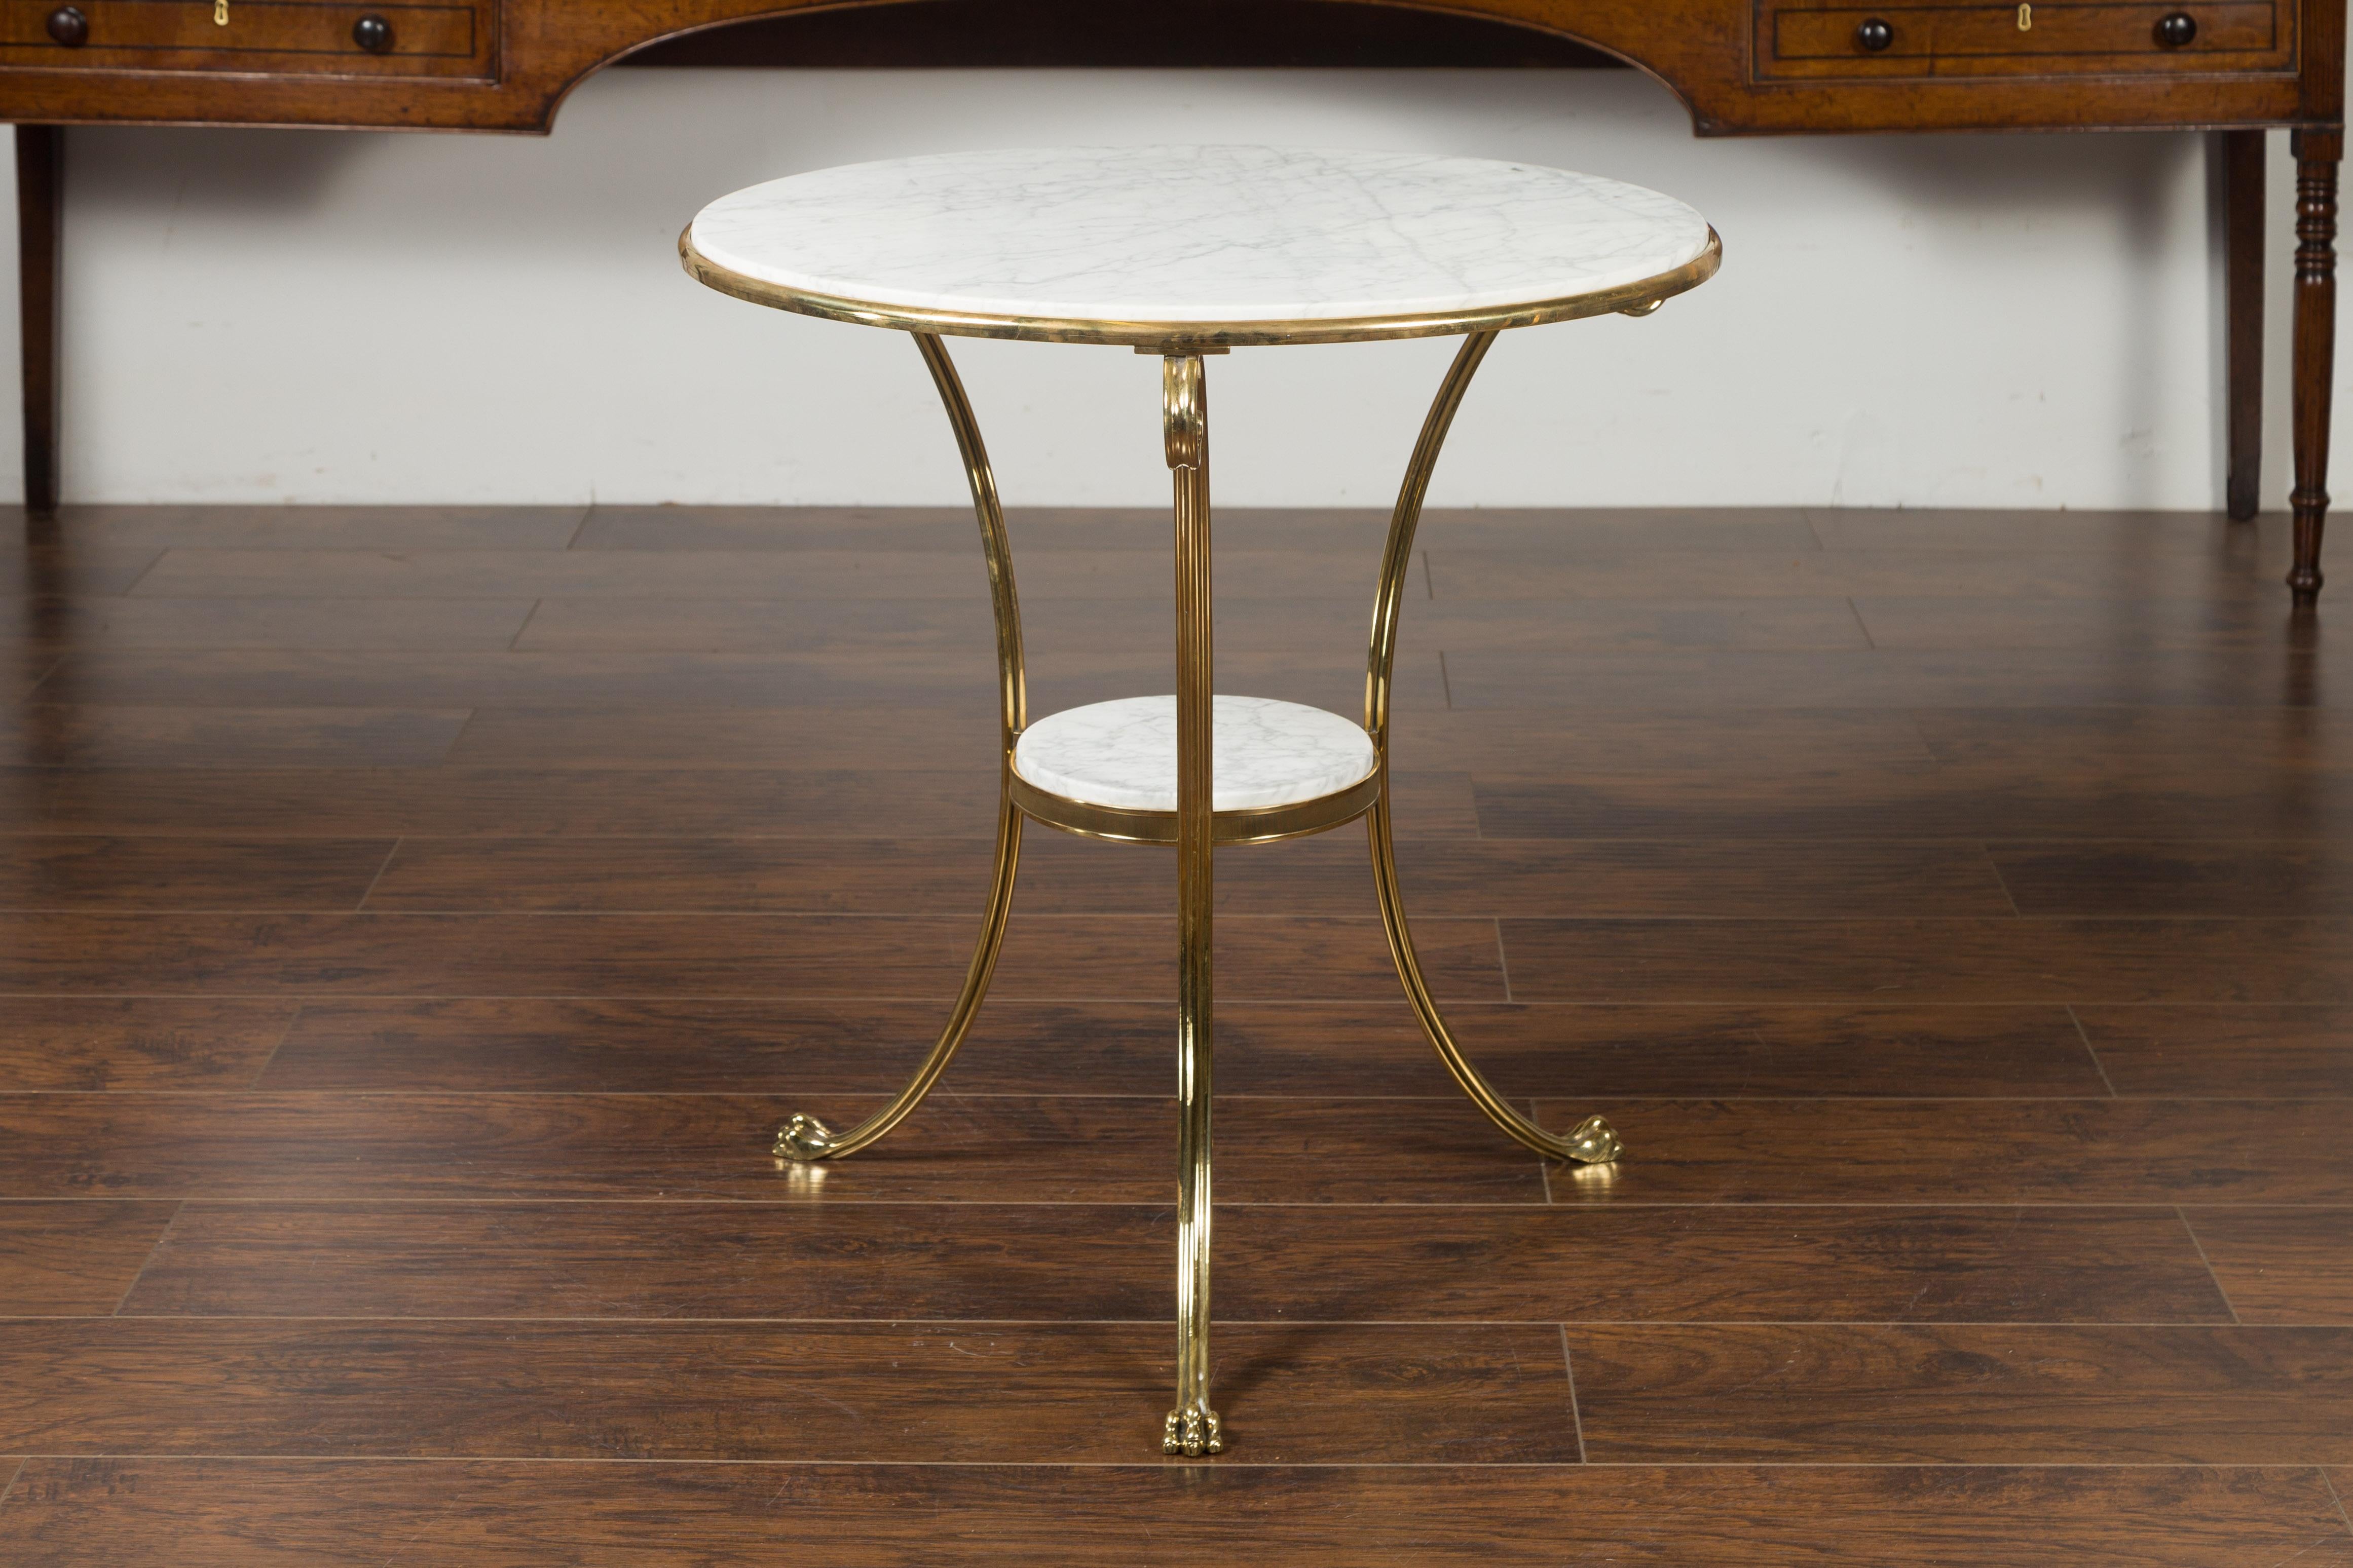 A vintage Italian brass side table from the mid-20th century with round marble top and shelf. Created in Italy during the midcentury period, this stylish side table features a circular white veined marble top secured within a brass structure. Three